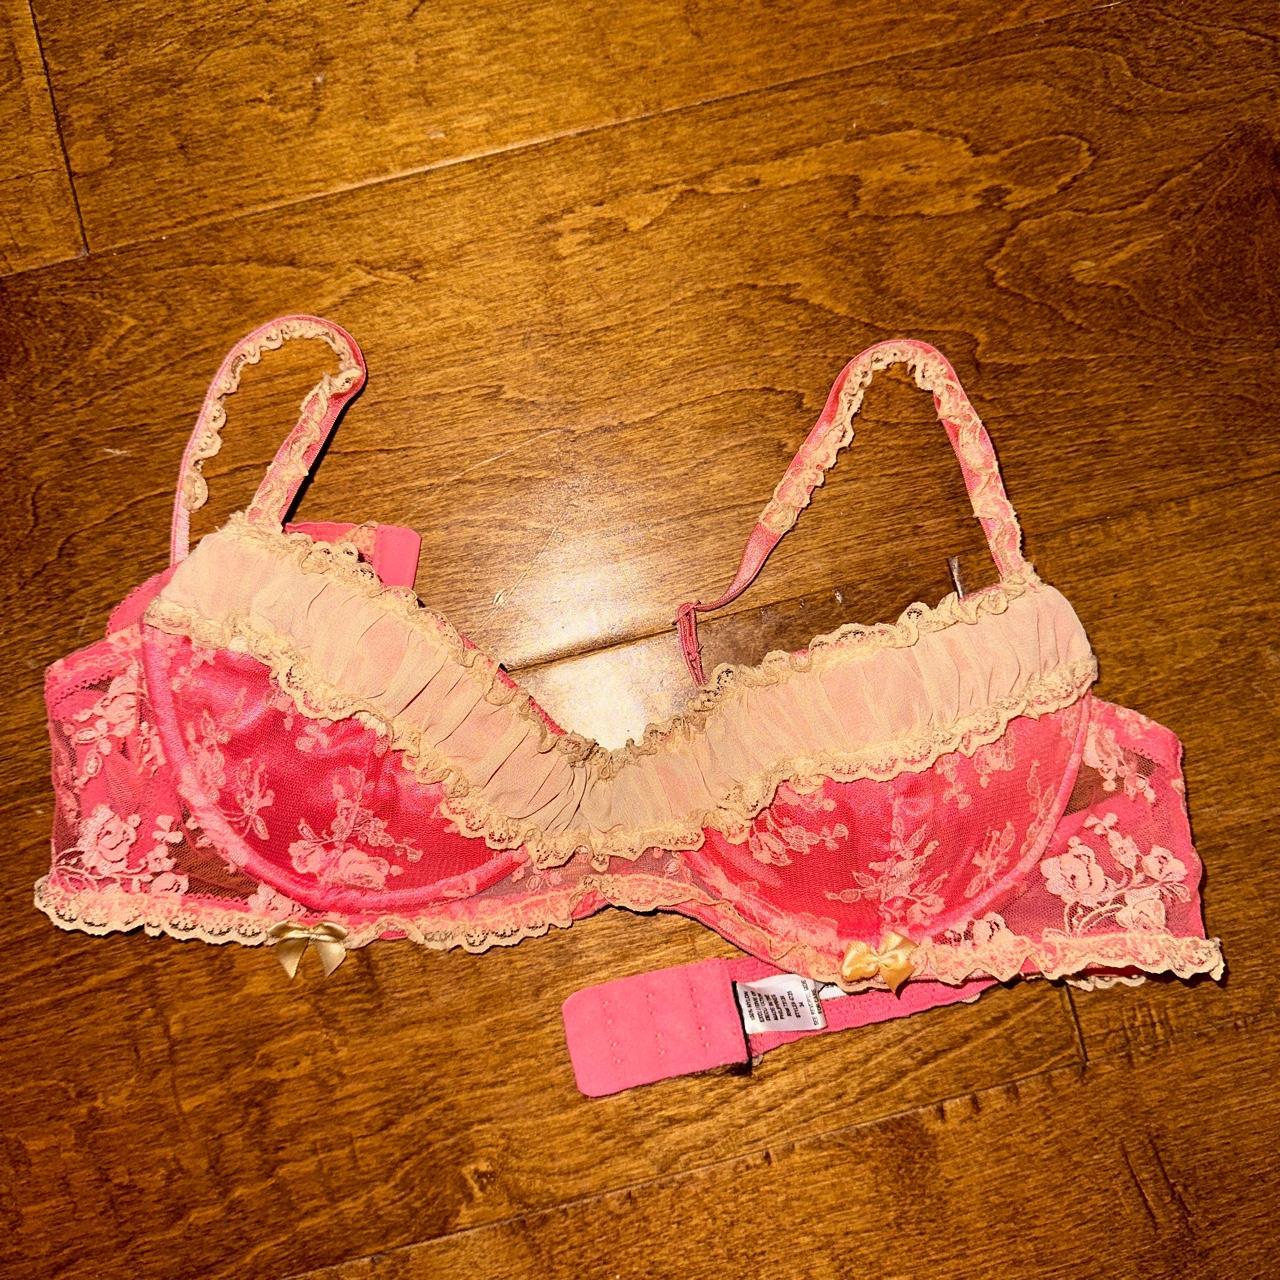 white lace cheetah print bra from PINK by victoria's - Depop